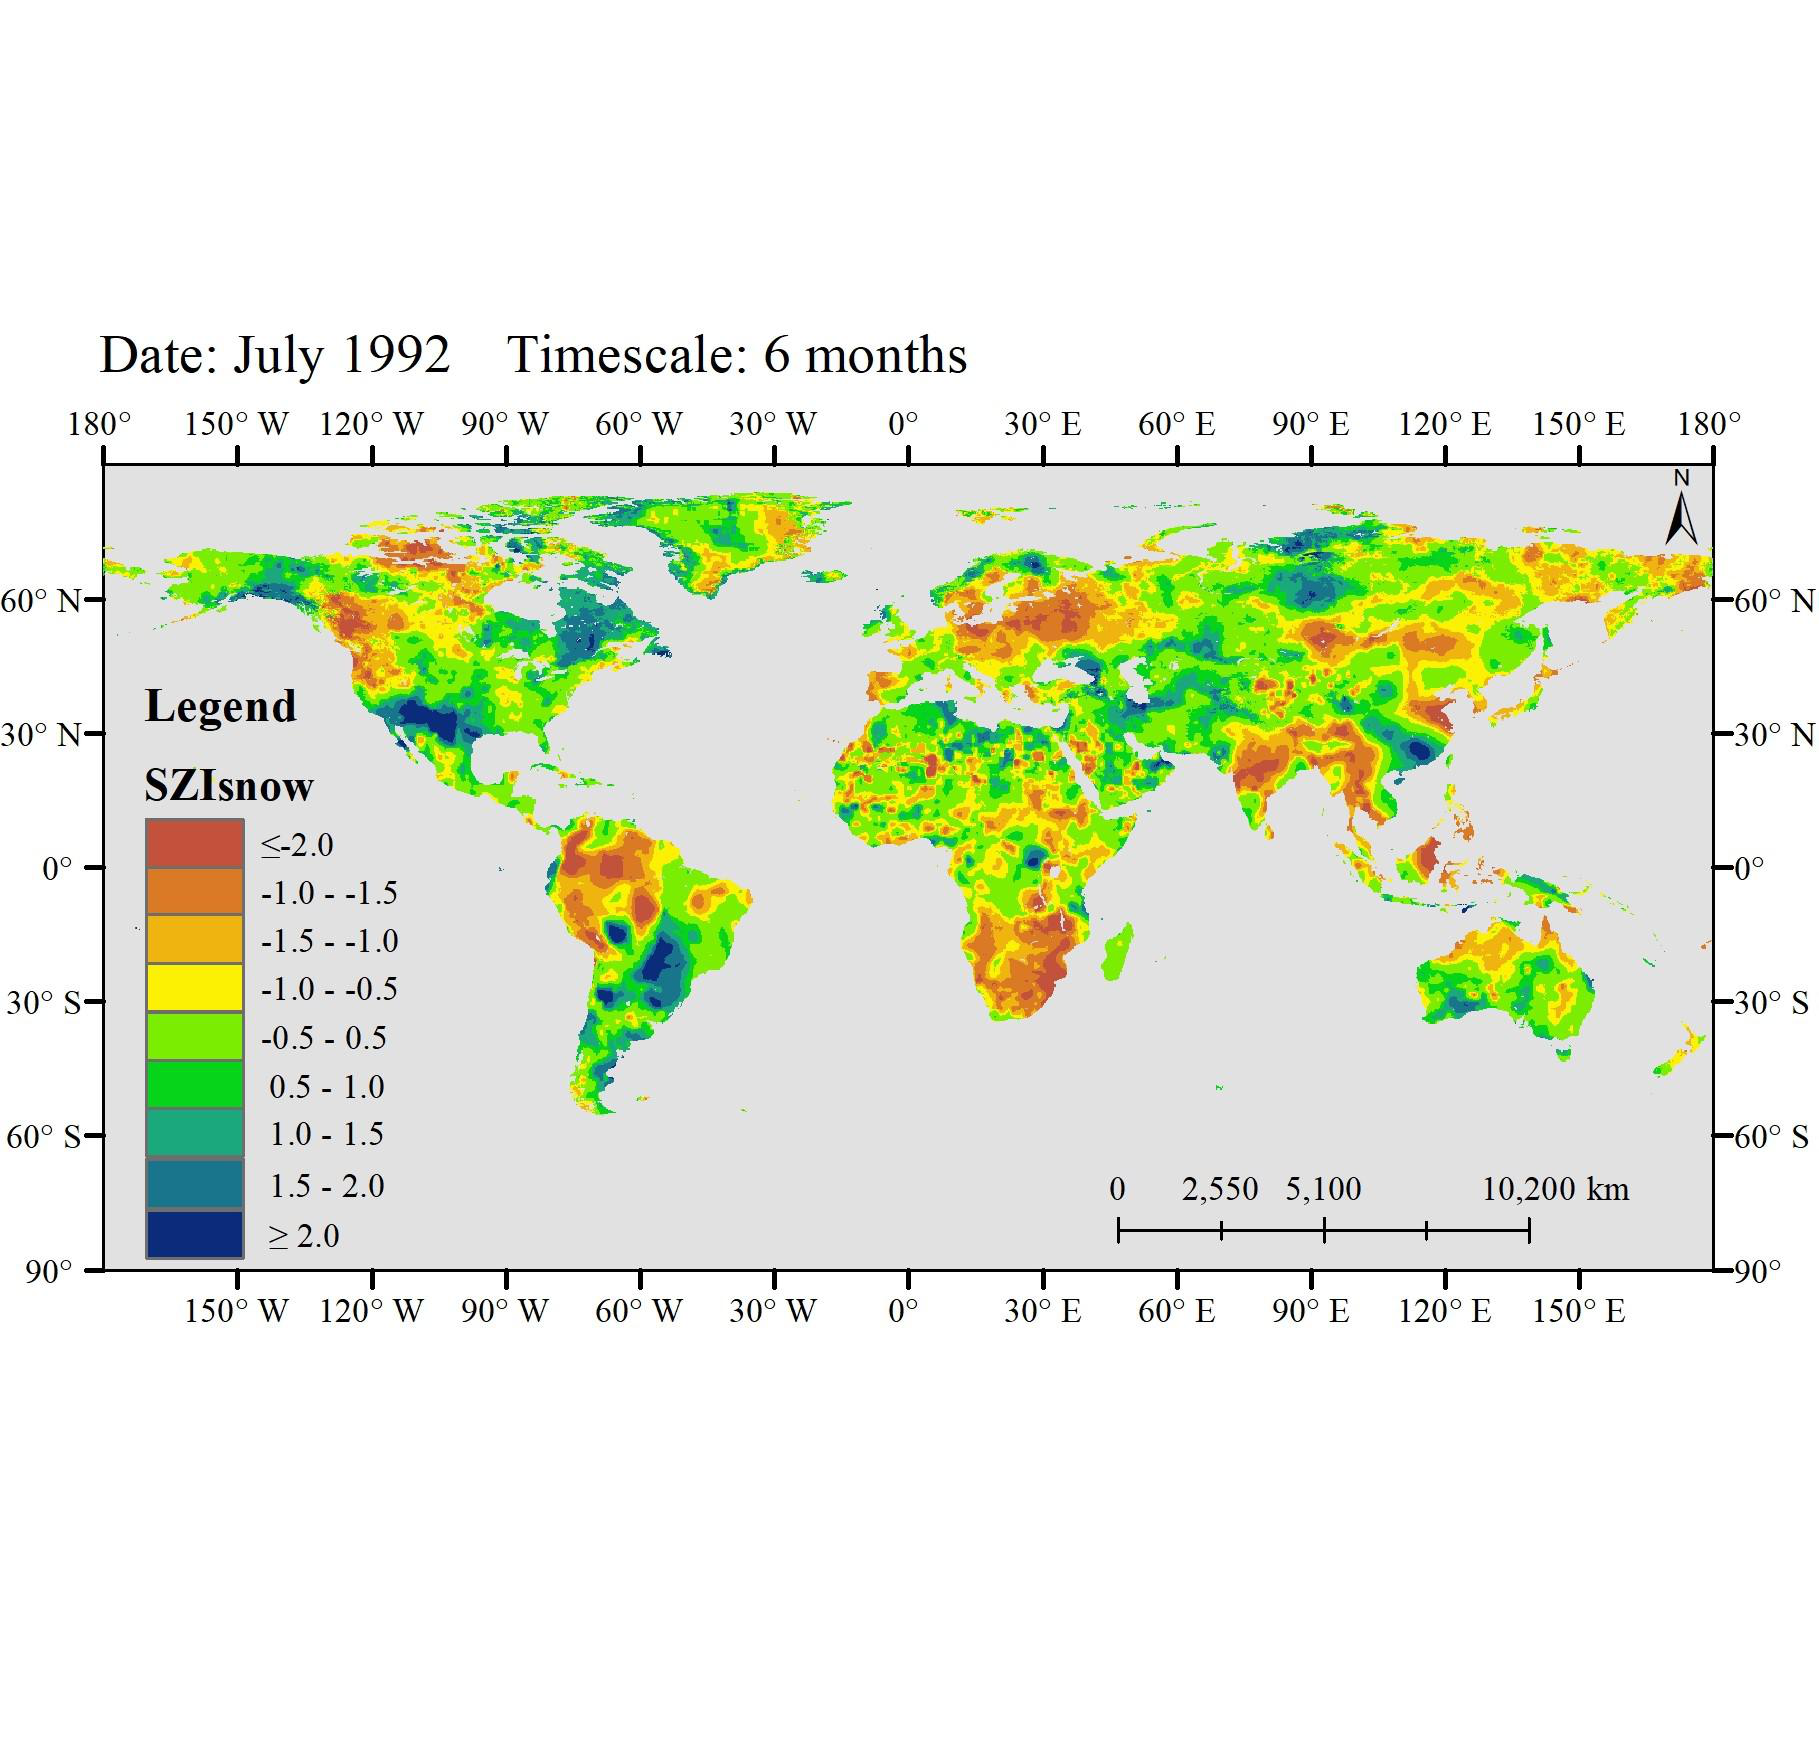 A global dataset of standardized moisture anomaly index incorporating snow dynamics (SZIsnow) from 1948 to 2010